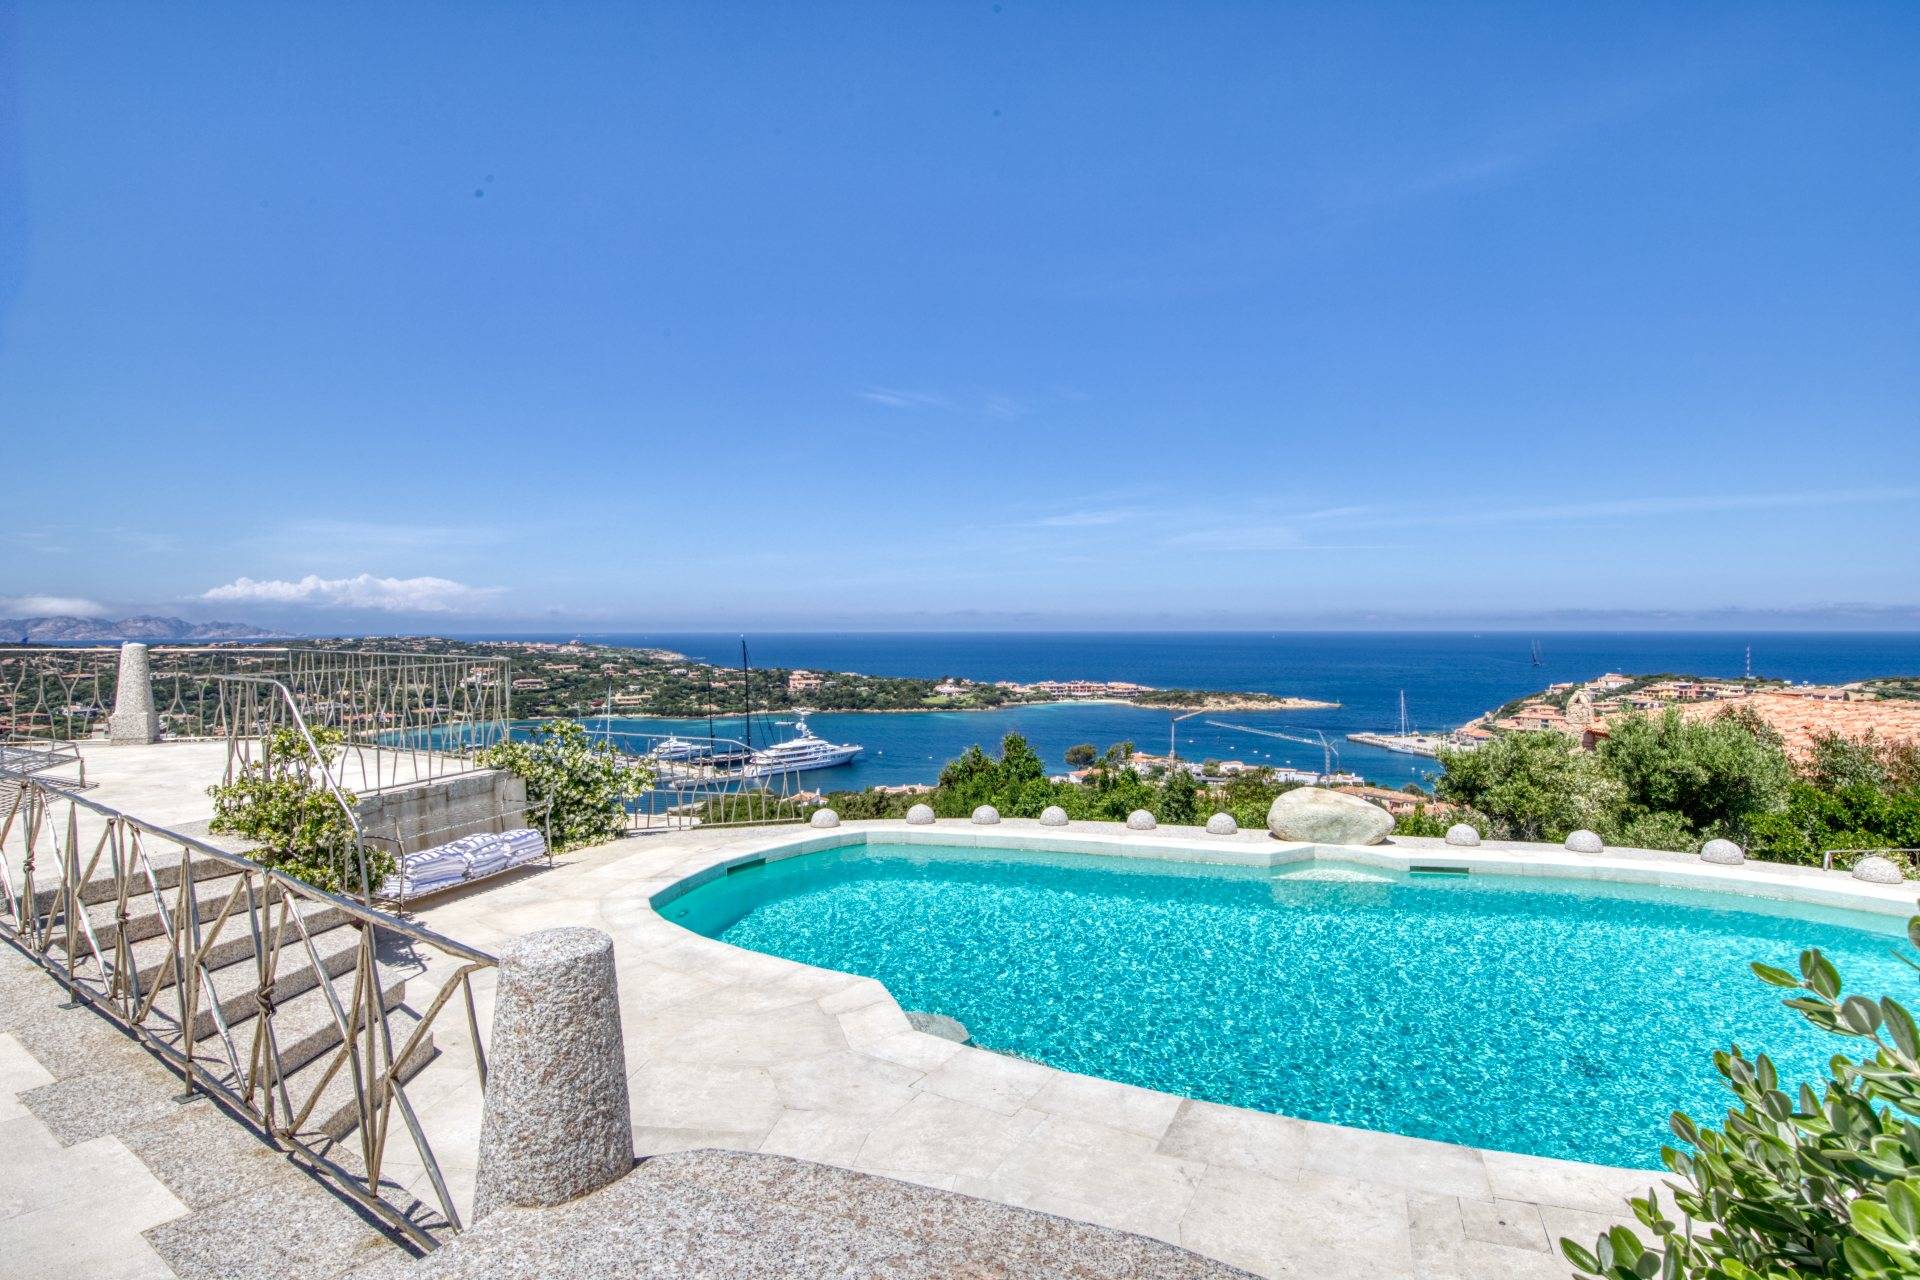 UNIQUE OPPORTUNITY TO PURCHASE THIS BEAUTIFUL VILLA LOCATED IN PORTO CERVO WITH BEAUTIFUL SEA VIEW